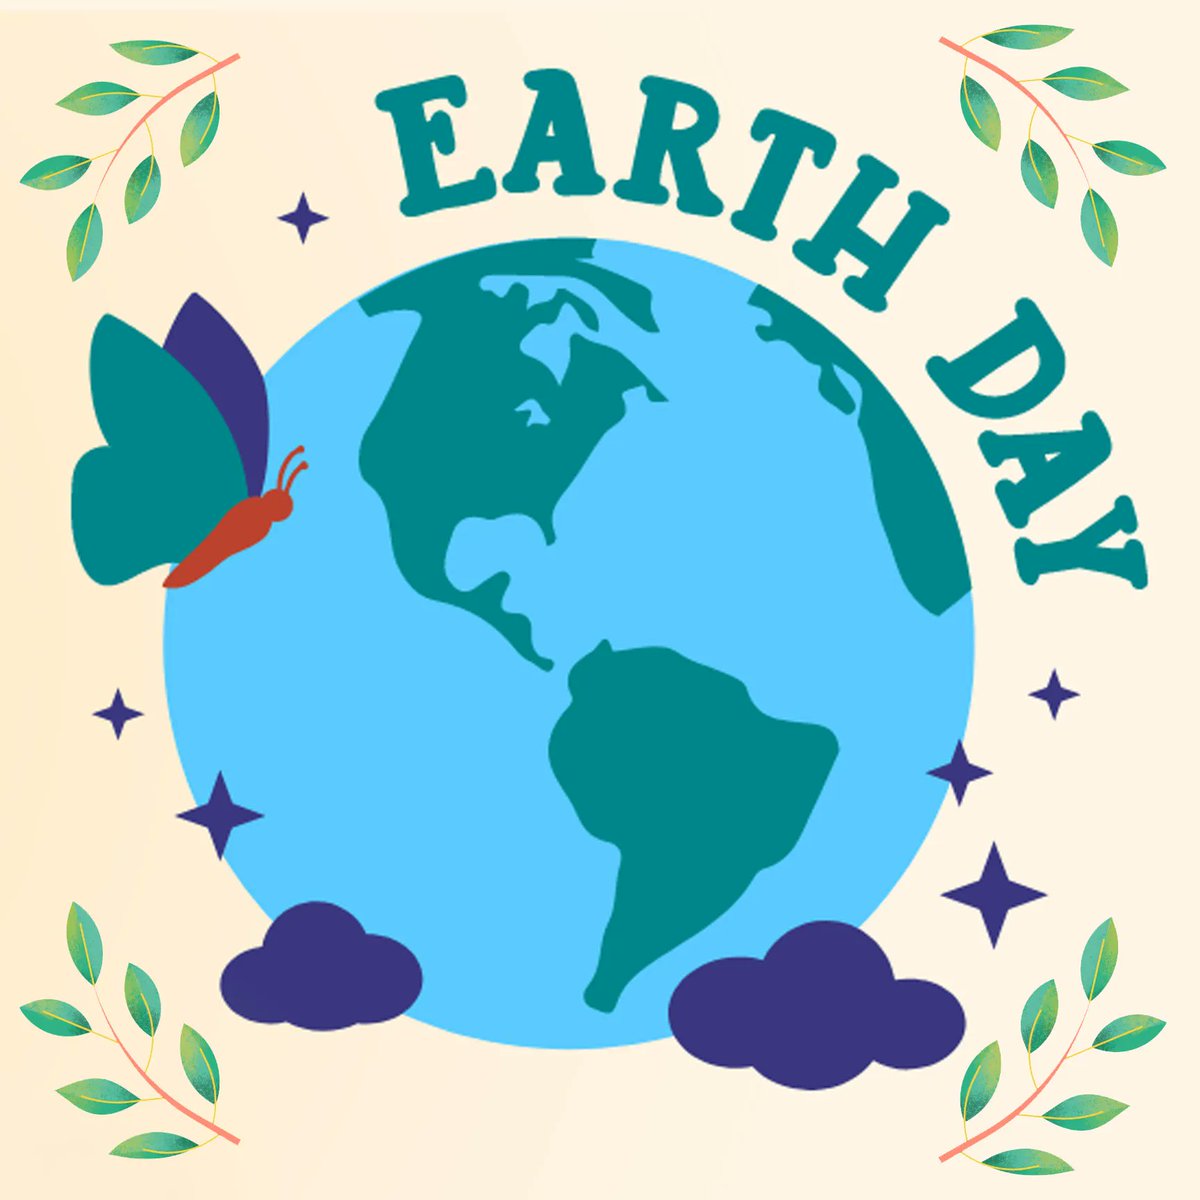 #earthday is coming to an end, but we must actively think about our planet and protect it every day. We must embrace the small efforts that affect global change together. To quote the GCE Environmentalist Club, 'Nature is all we are.' #EveryDayEarthDay 🌎💚